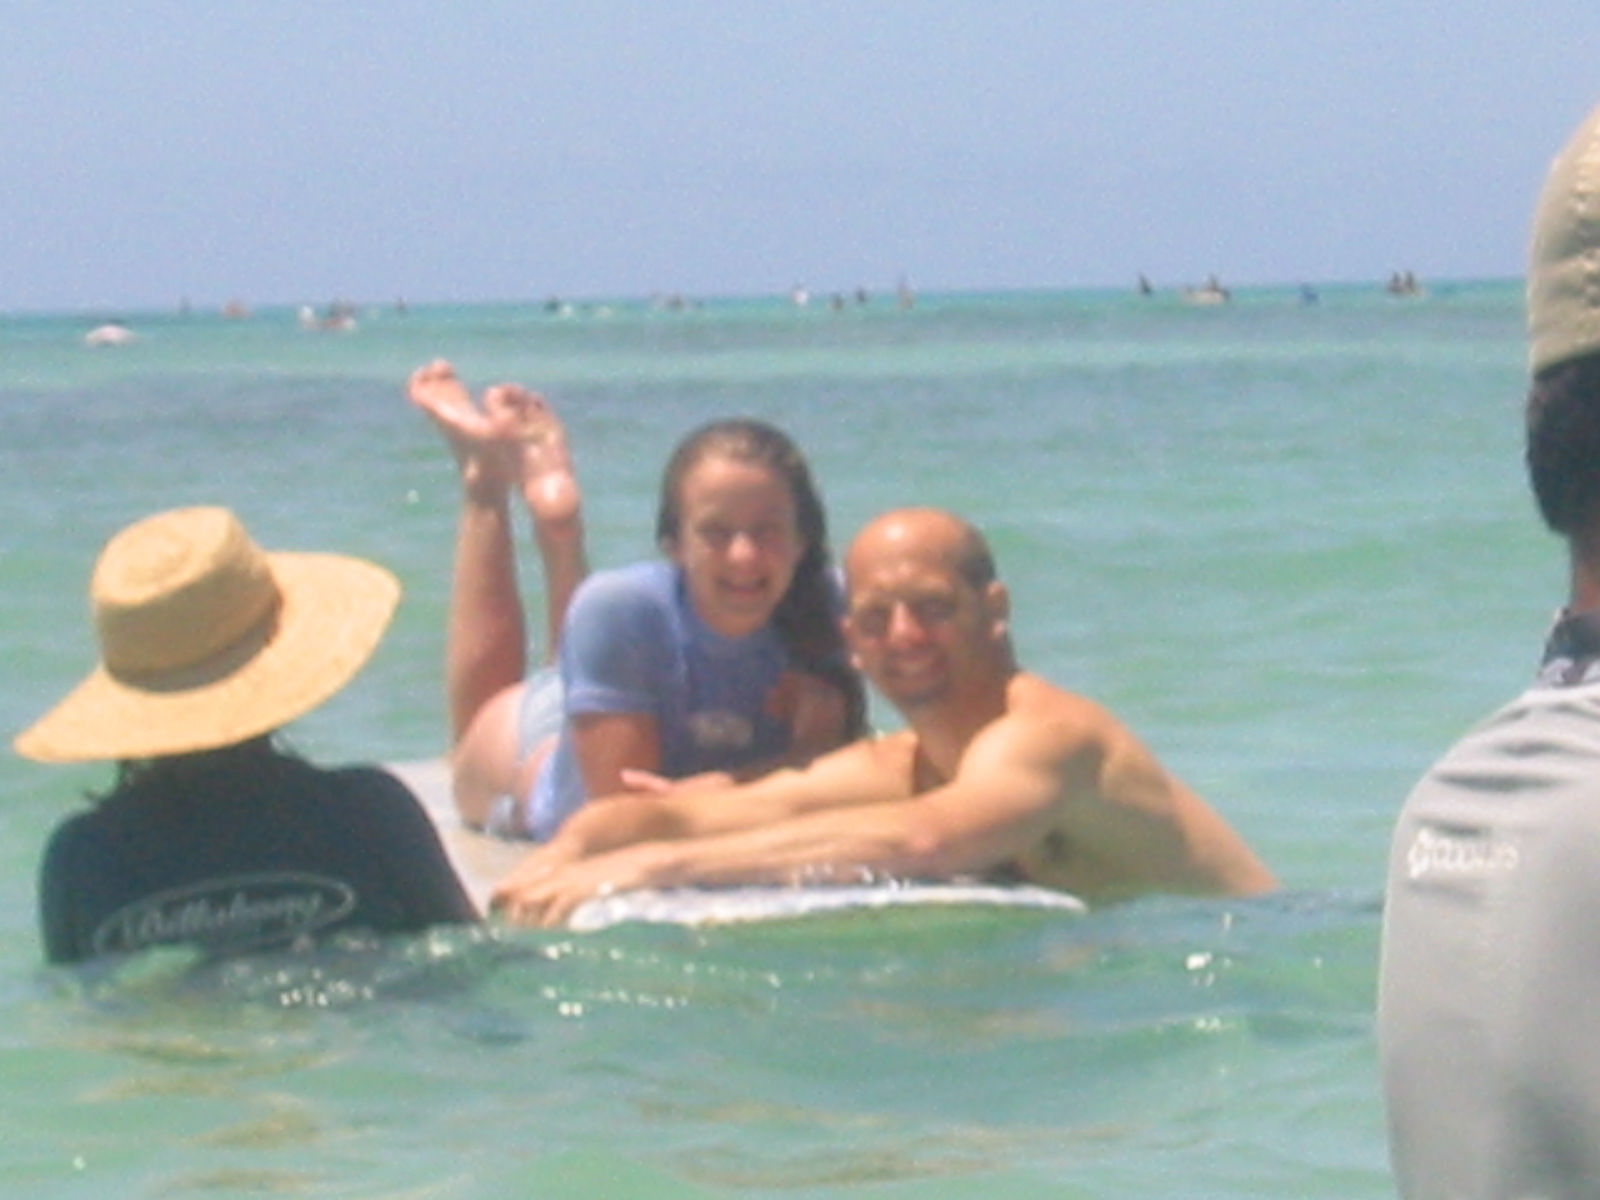 Hallee Hirsh with Anthony Edwards Behind the Scenes getting ready to shoot surfing scene in 